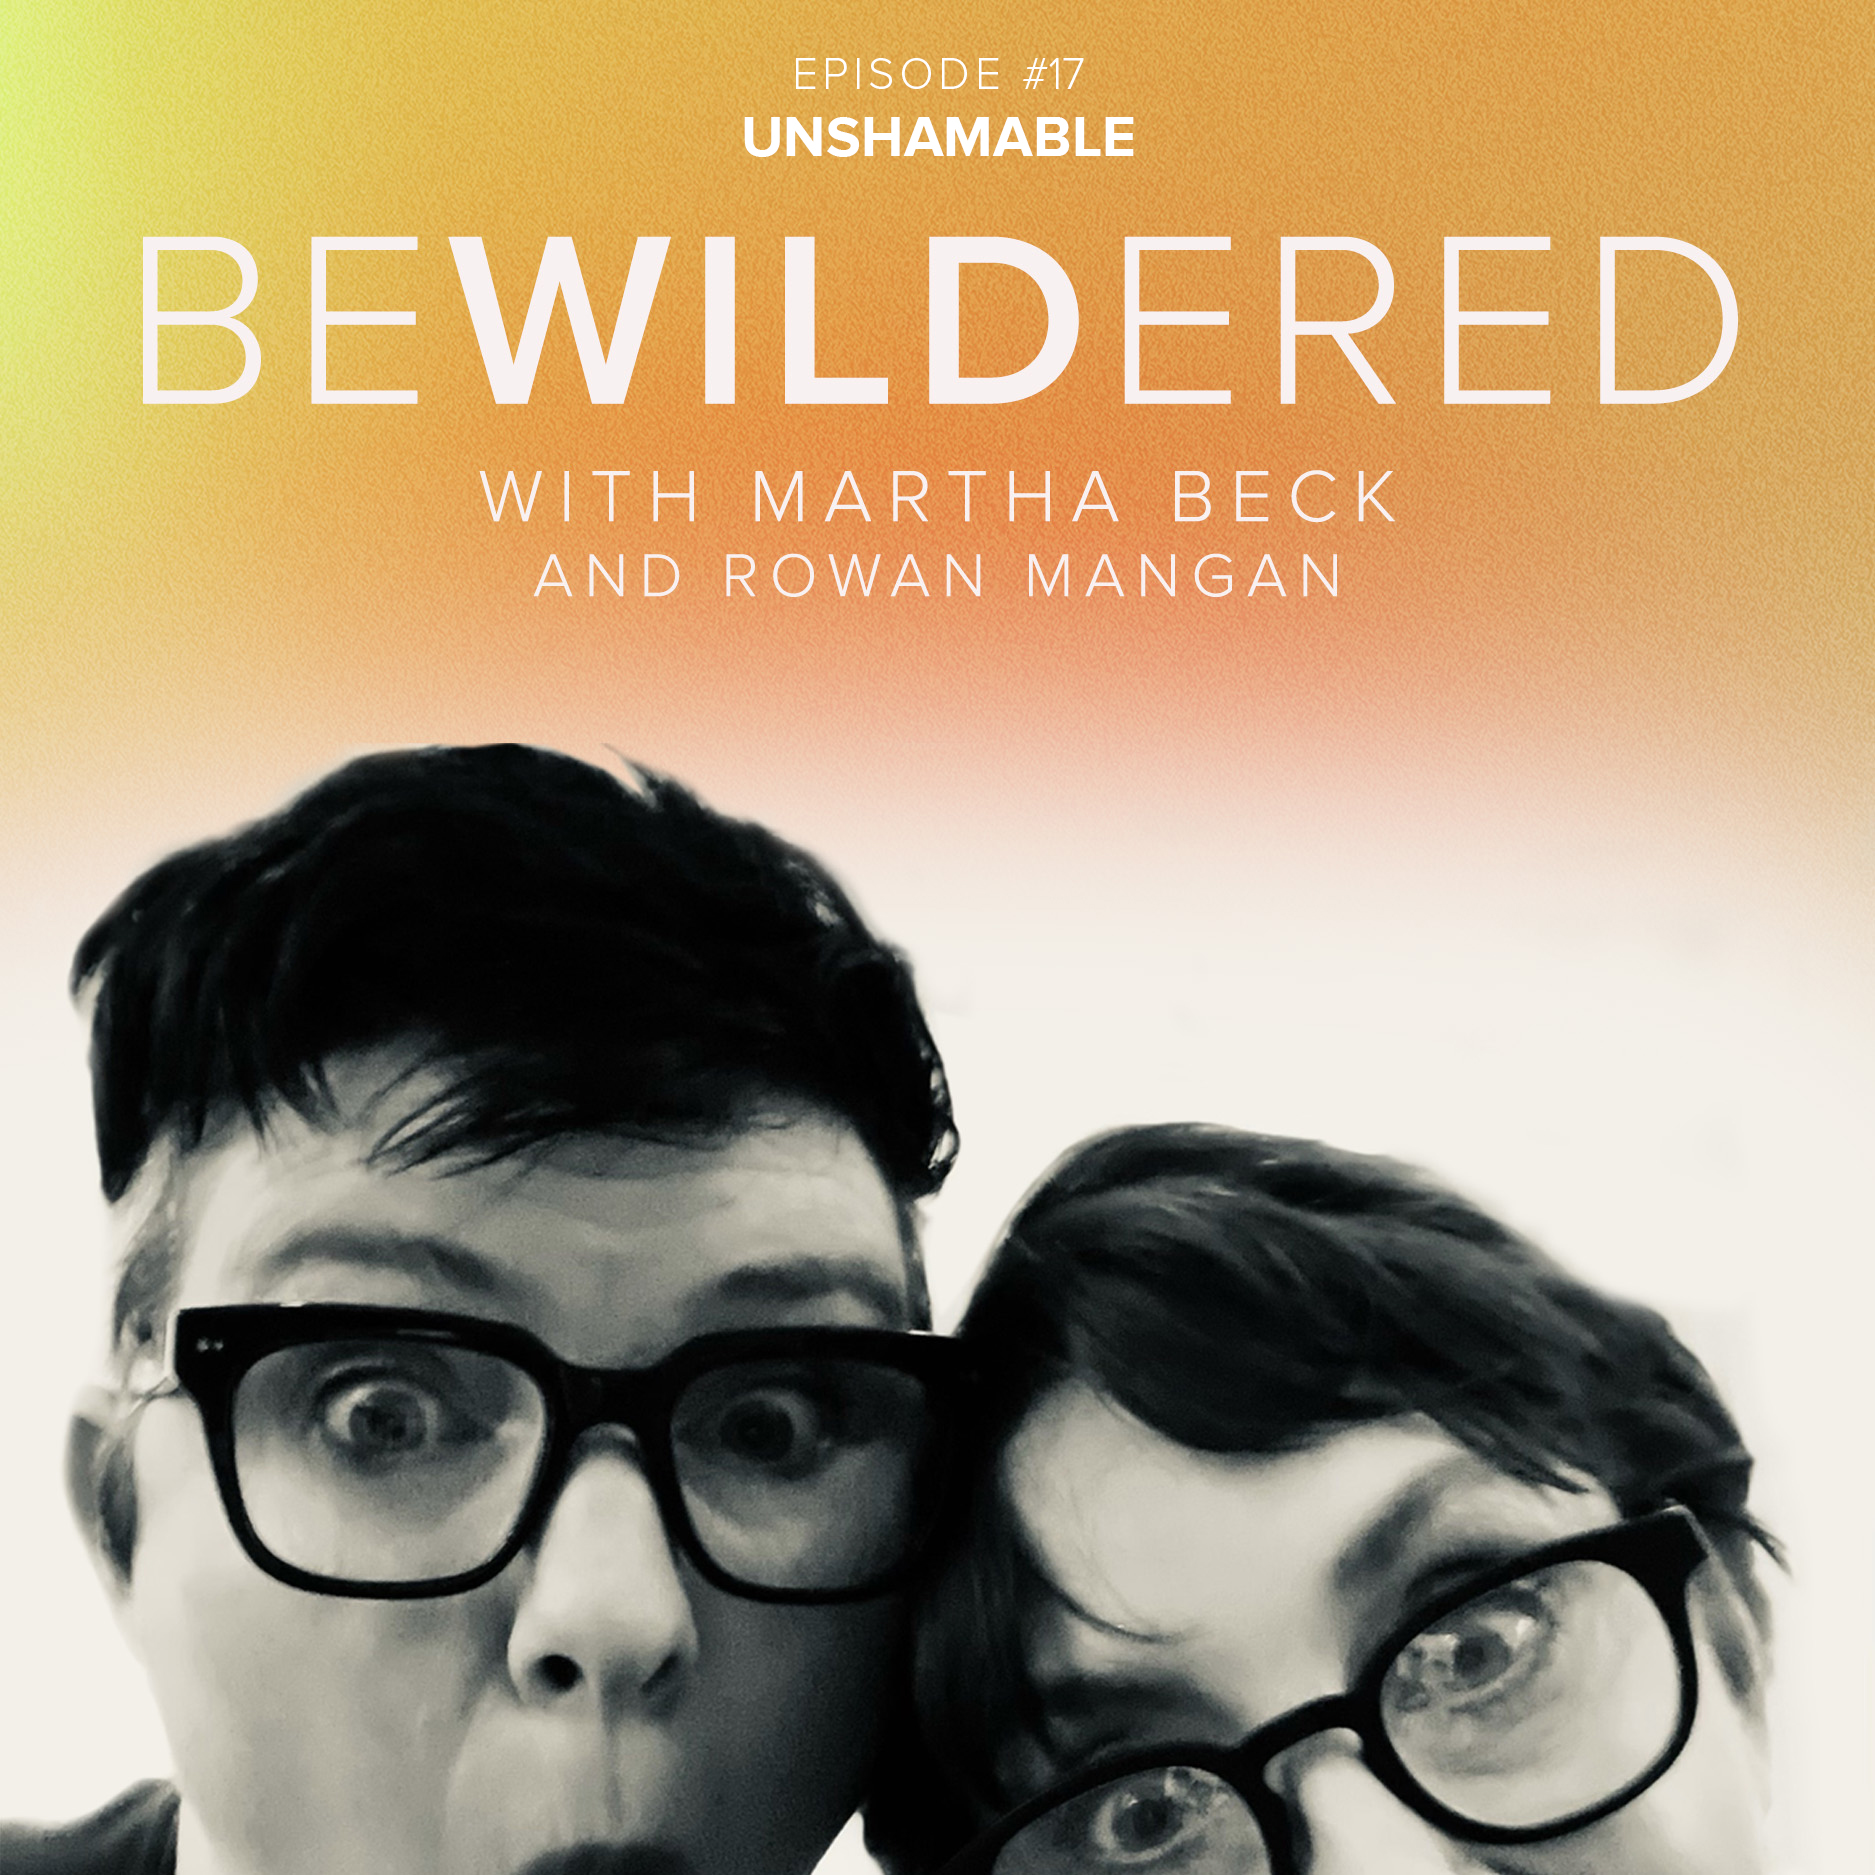 Image for Episode #17 Unshamable for the Bewildered Podcast with Martha Beck and Rowan Mangan